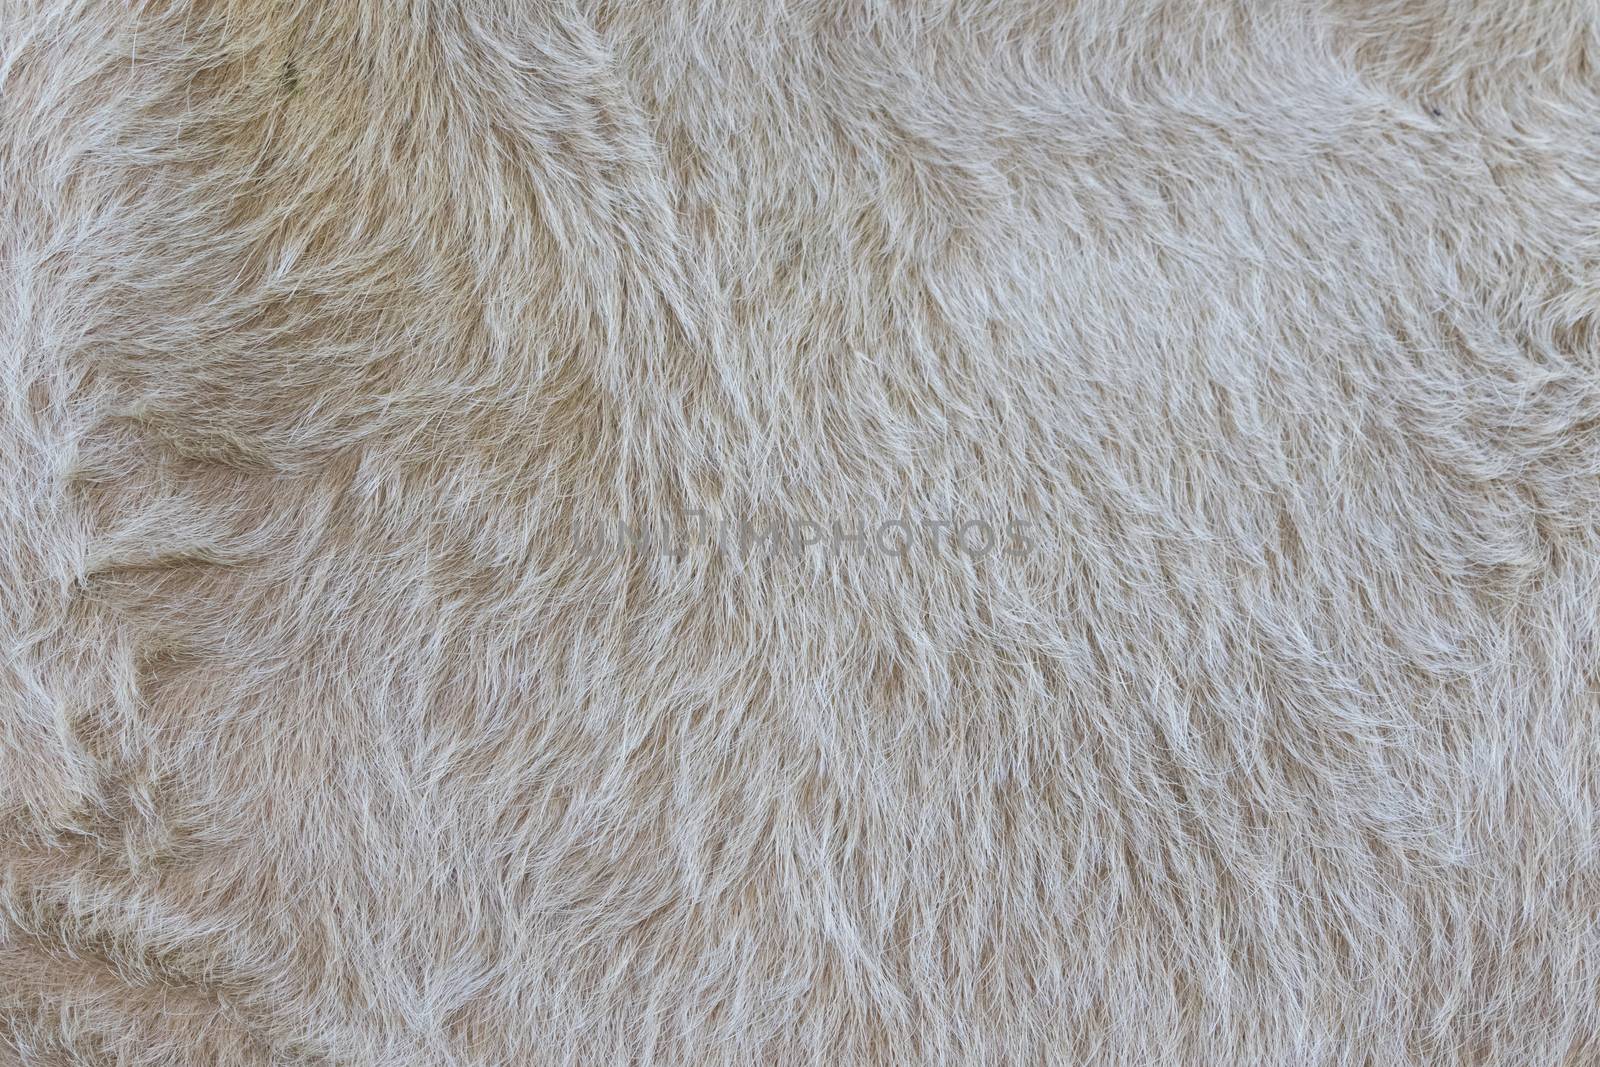 Detailed macro picture of cow skin. texture, background.